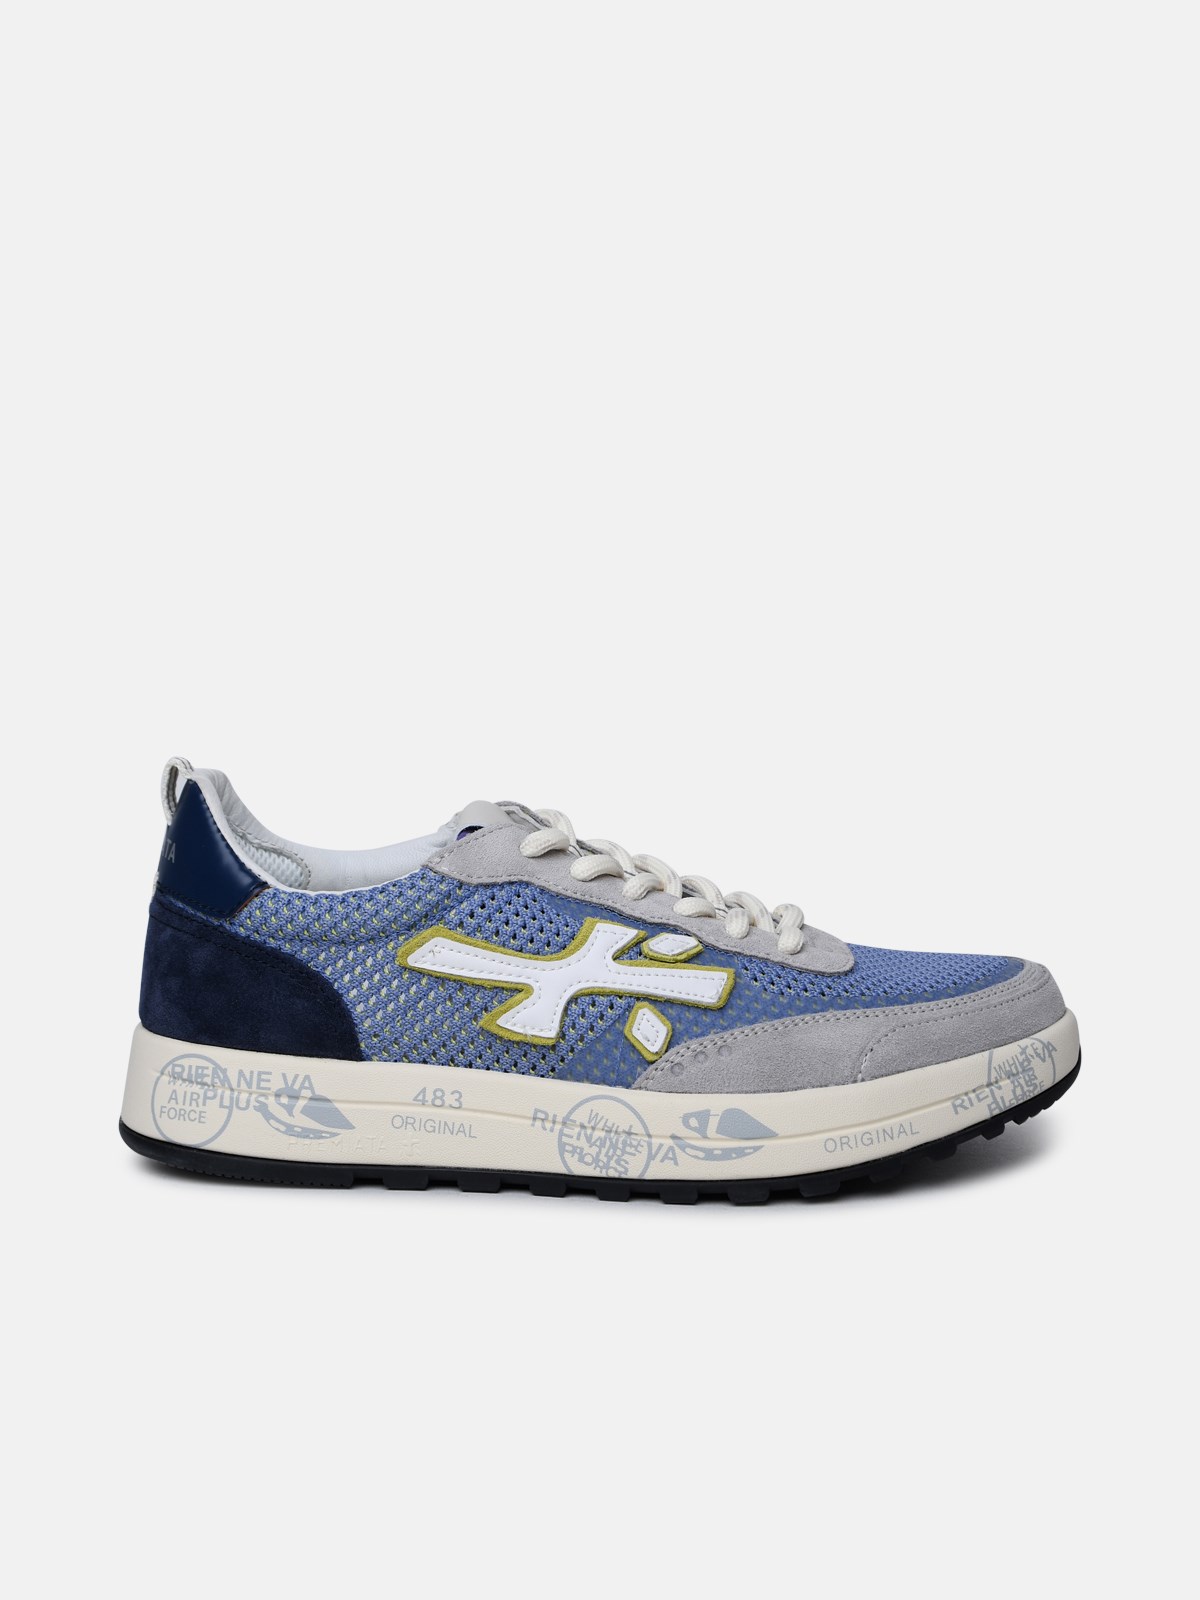 Premiata 'nous' Blue Leather And Fabric Sneakers In Light Blue